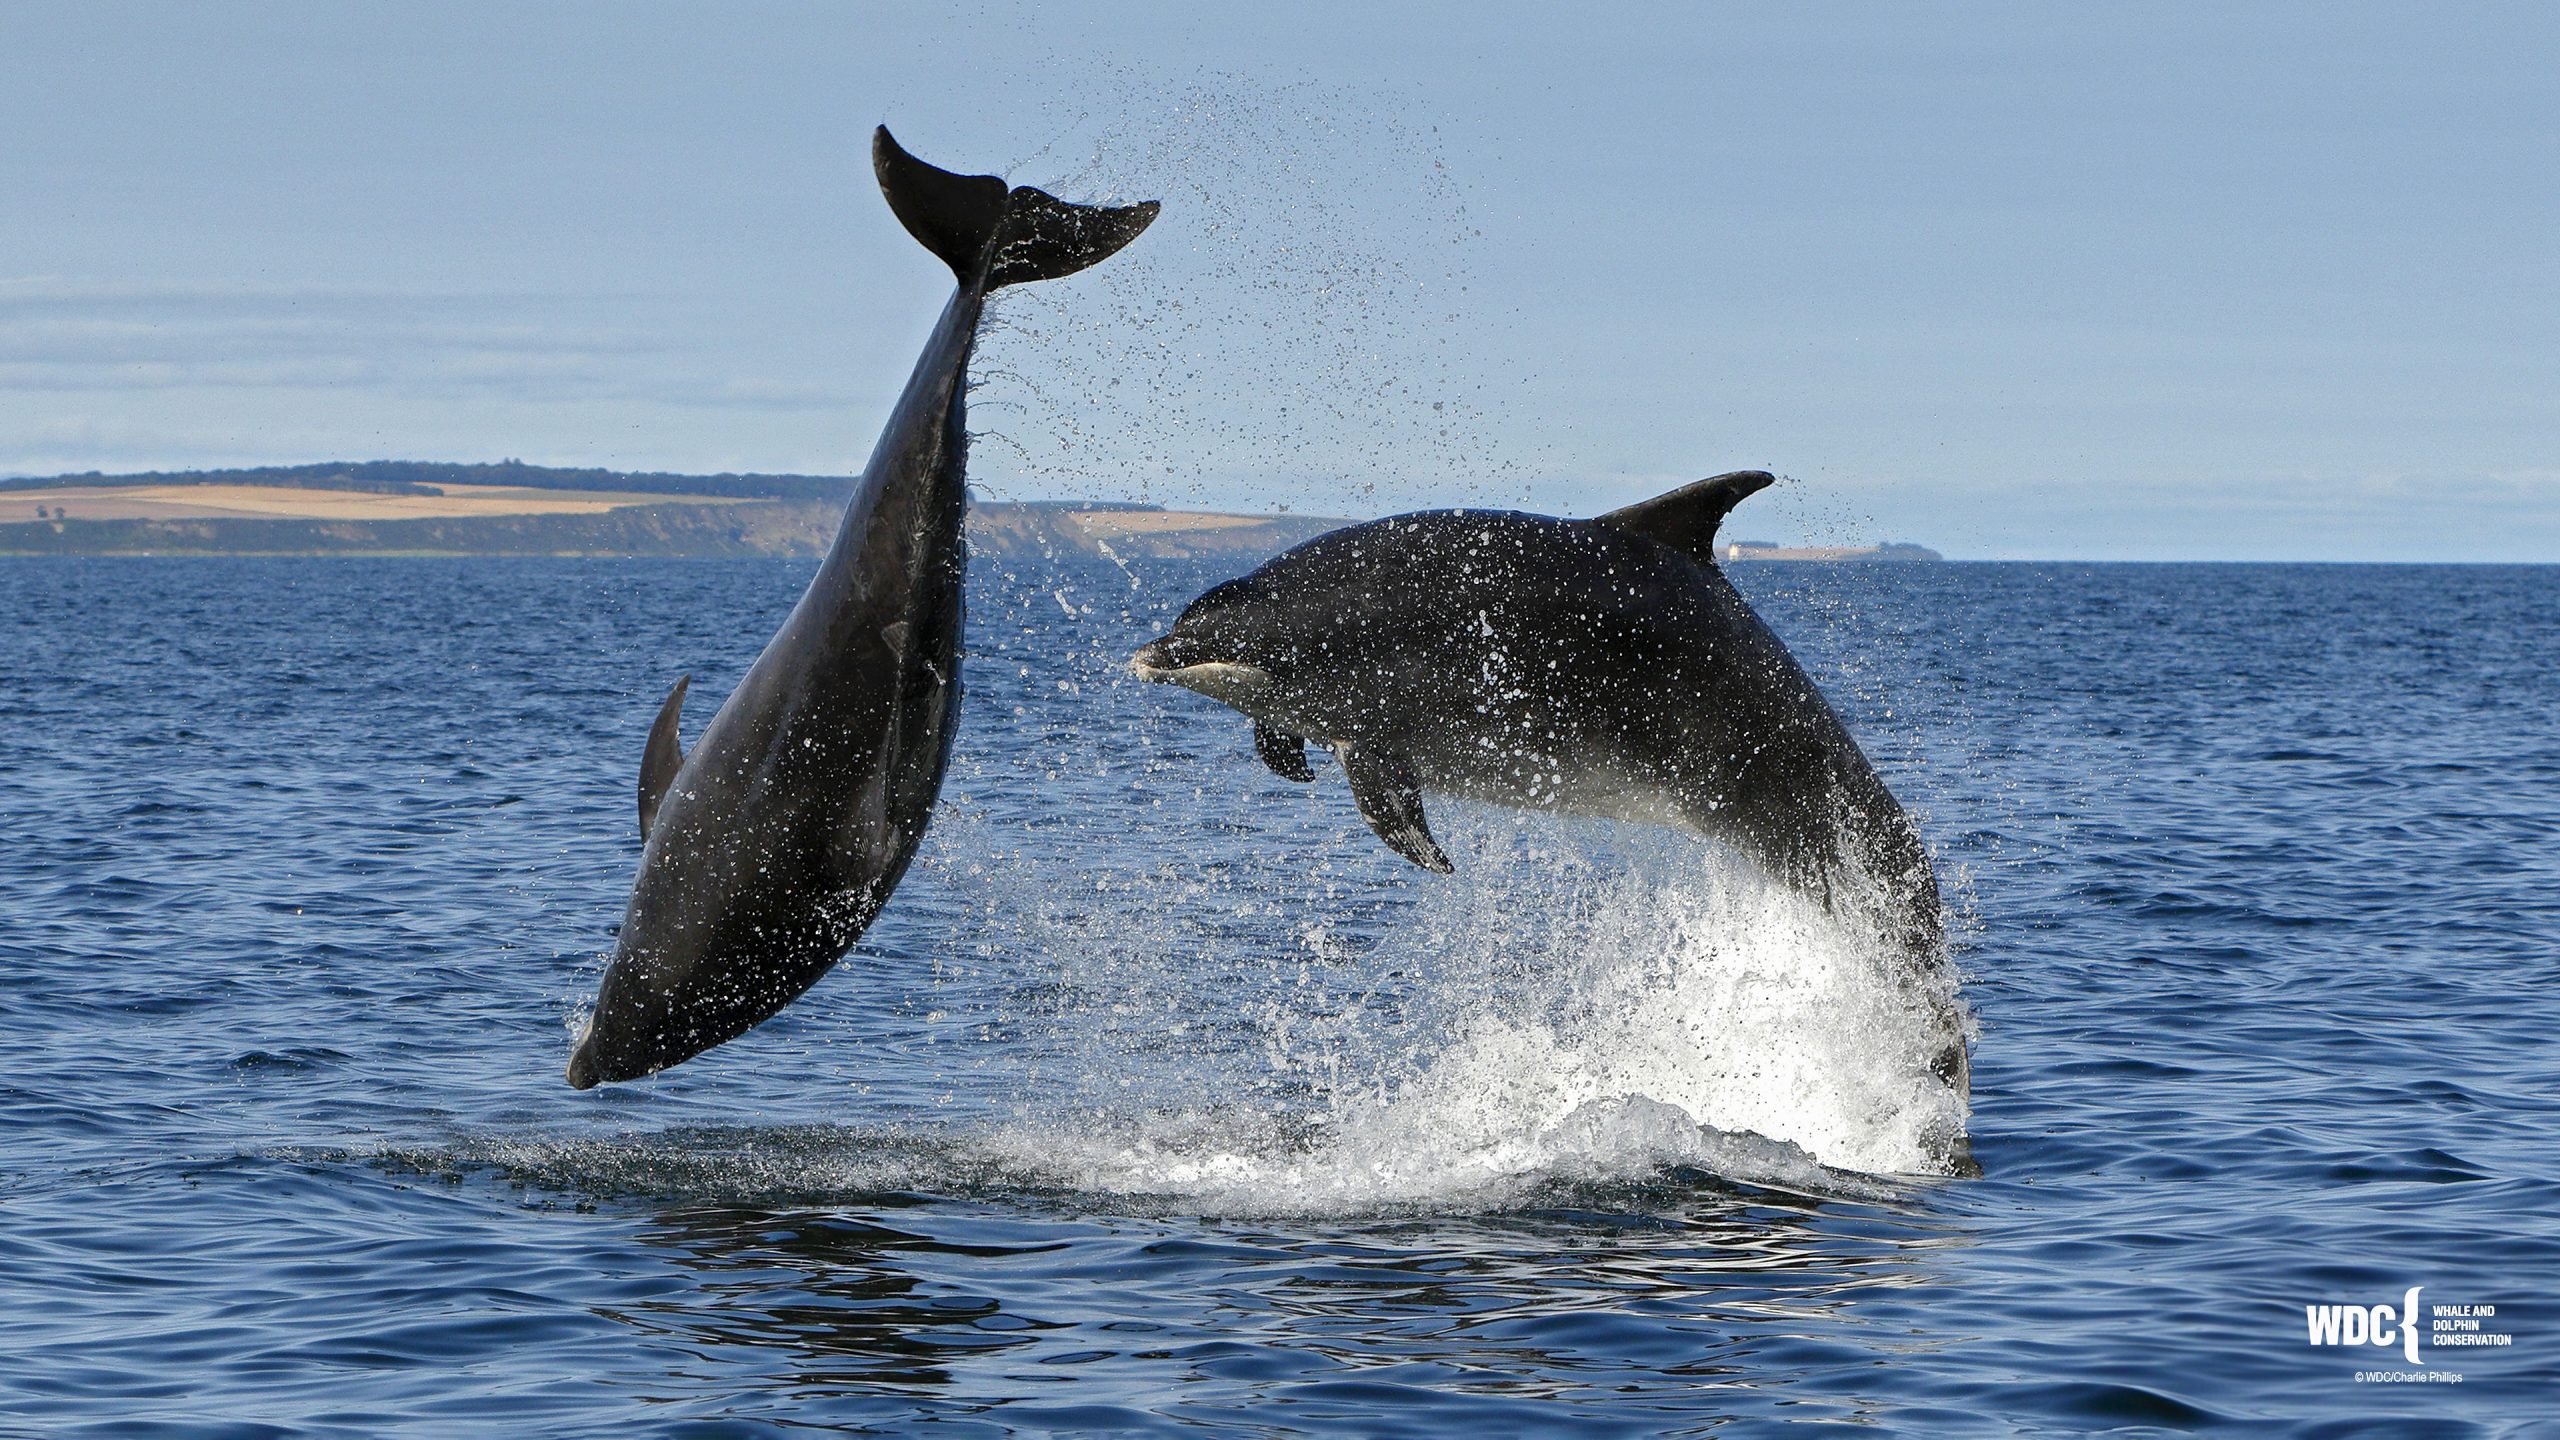 Why are whales and dolphins important for the oceans?